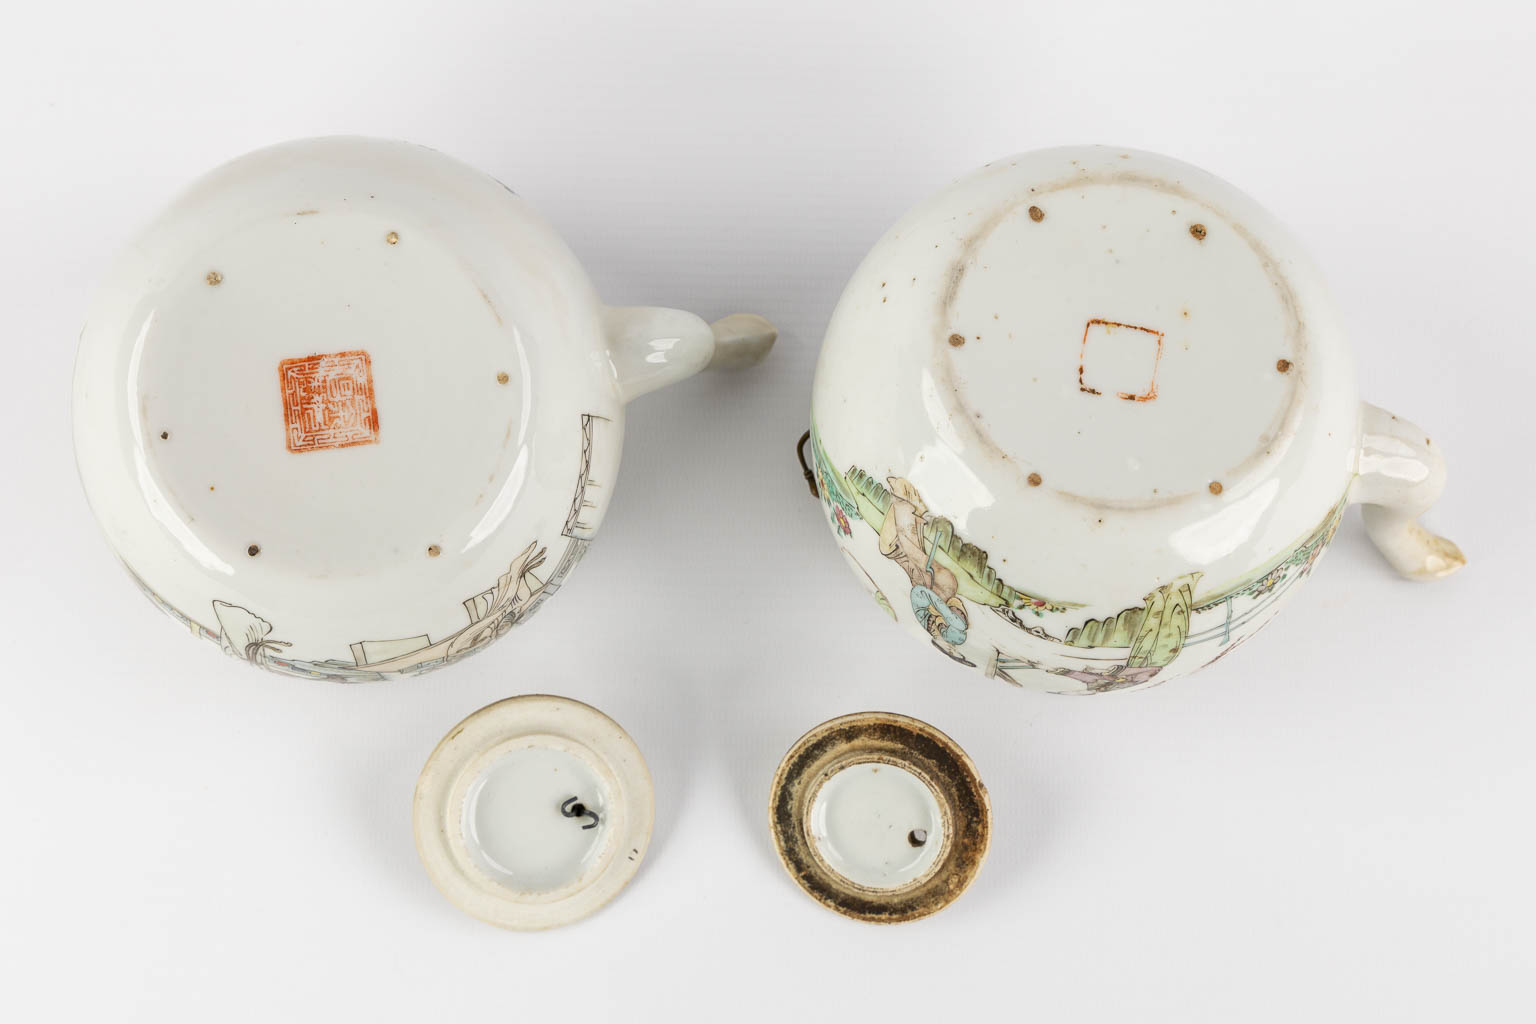 Two Chinese teapots, decorated with figurines. (L:13 x W:17,5 x H:10 cm)